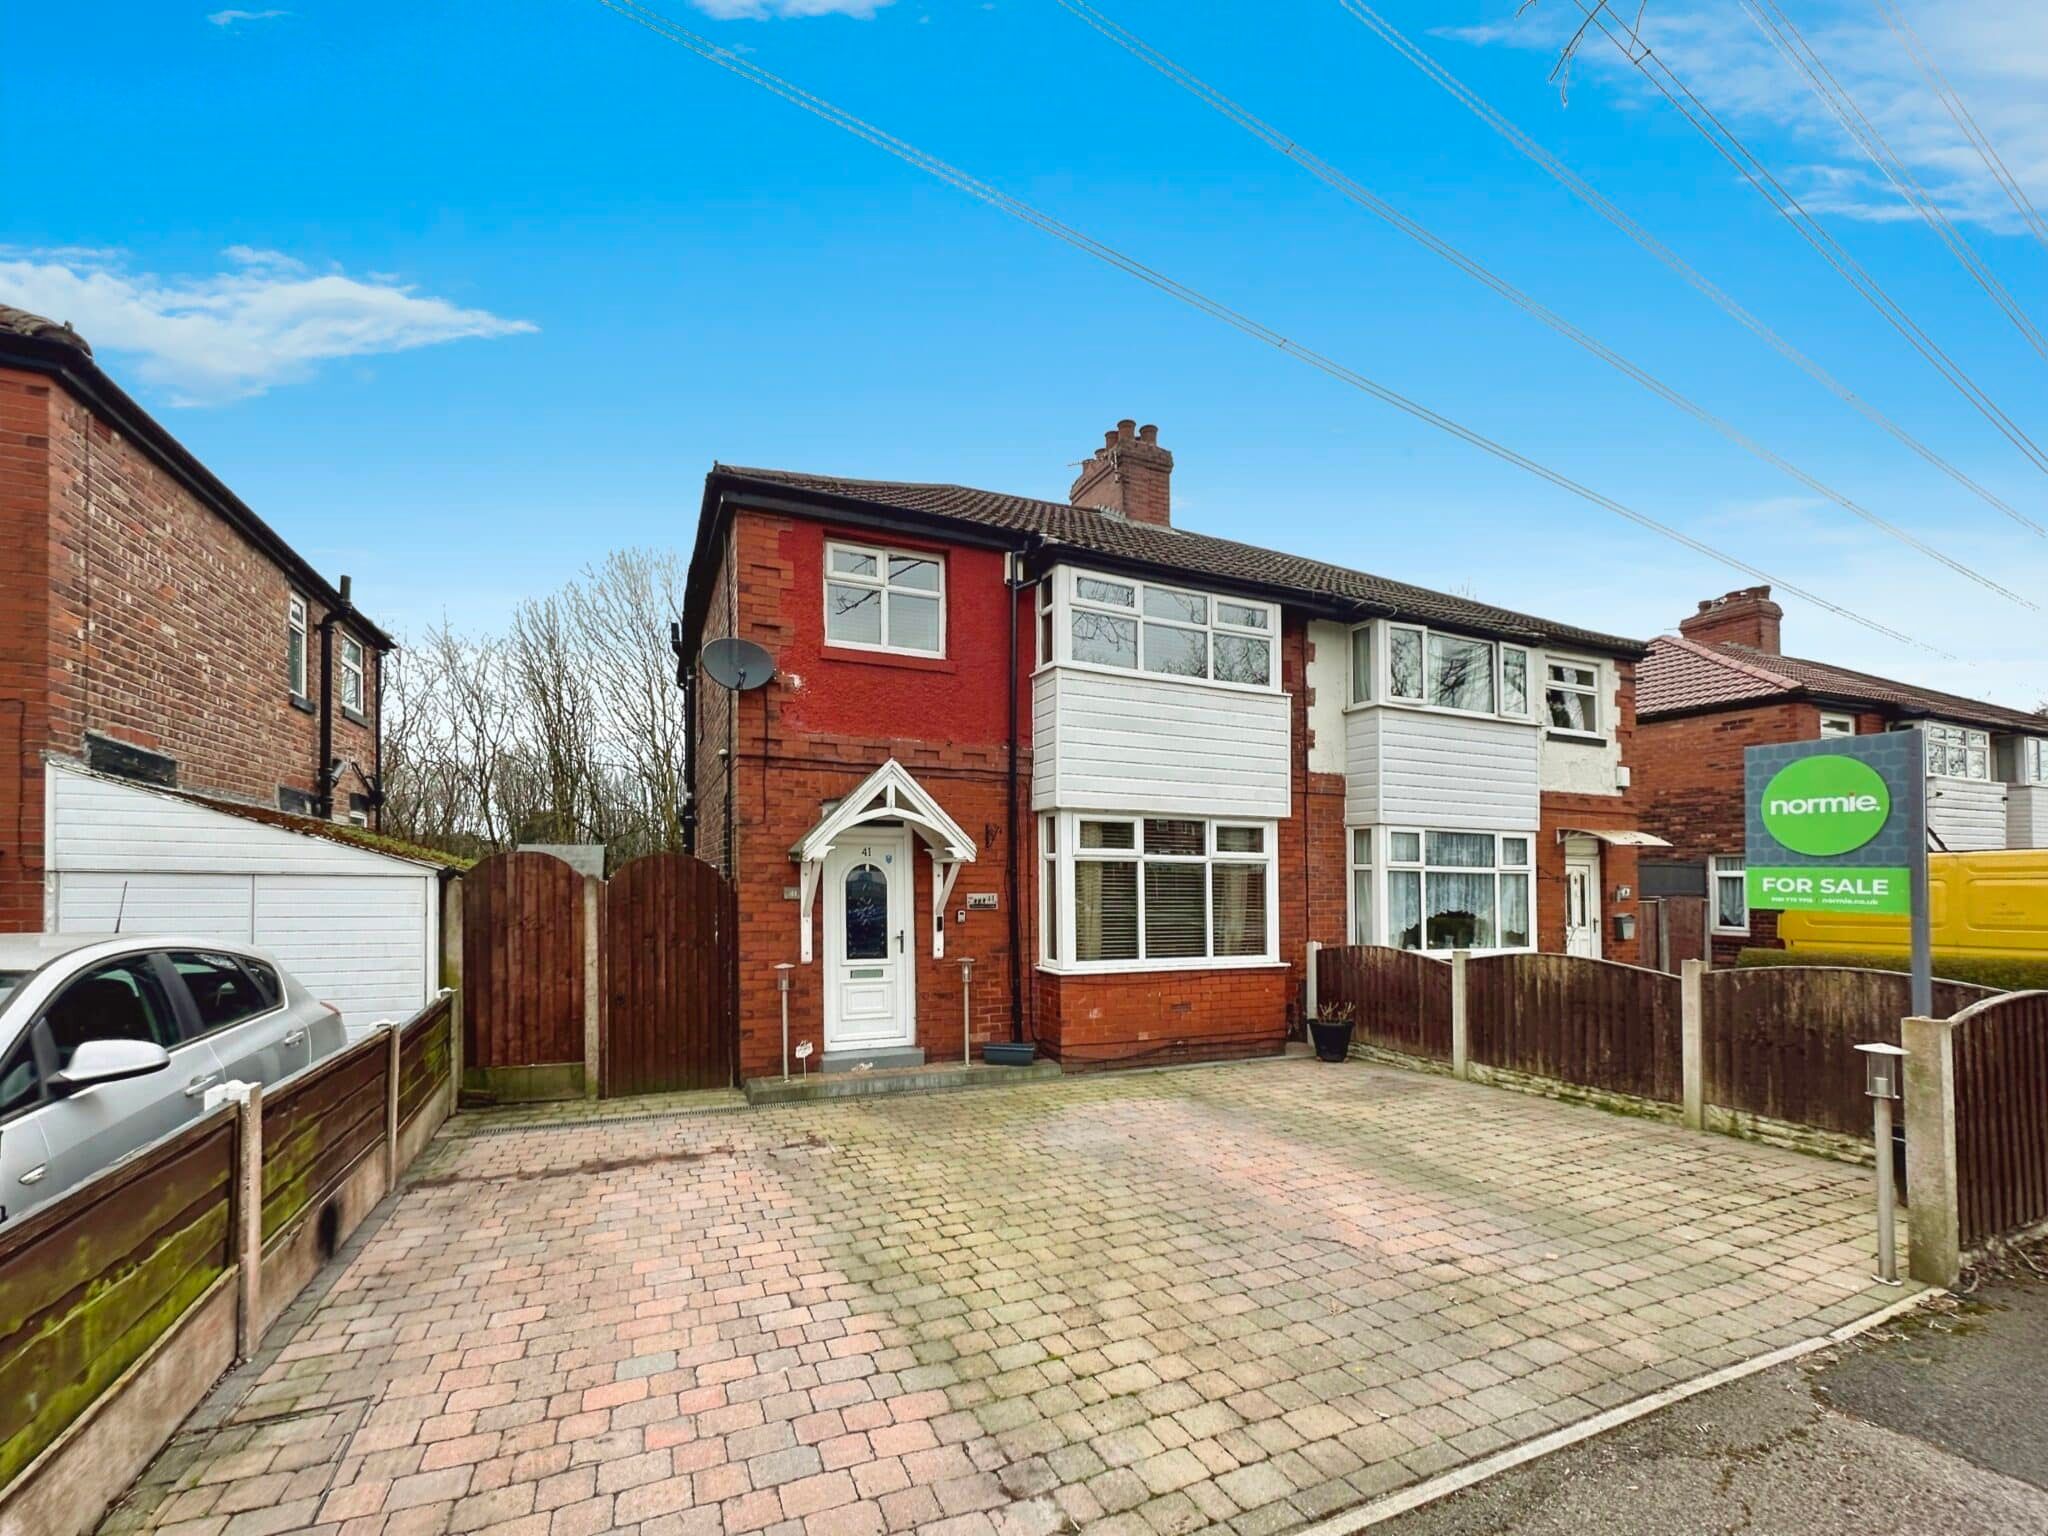 Kenilworth Avenue, Whitefield, Manchester, Manchester, M45 6TG